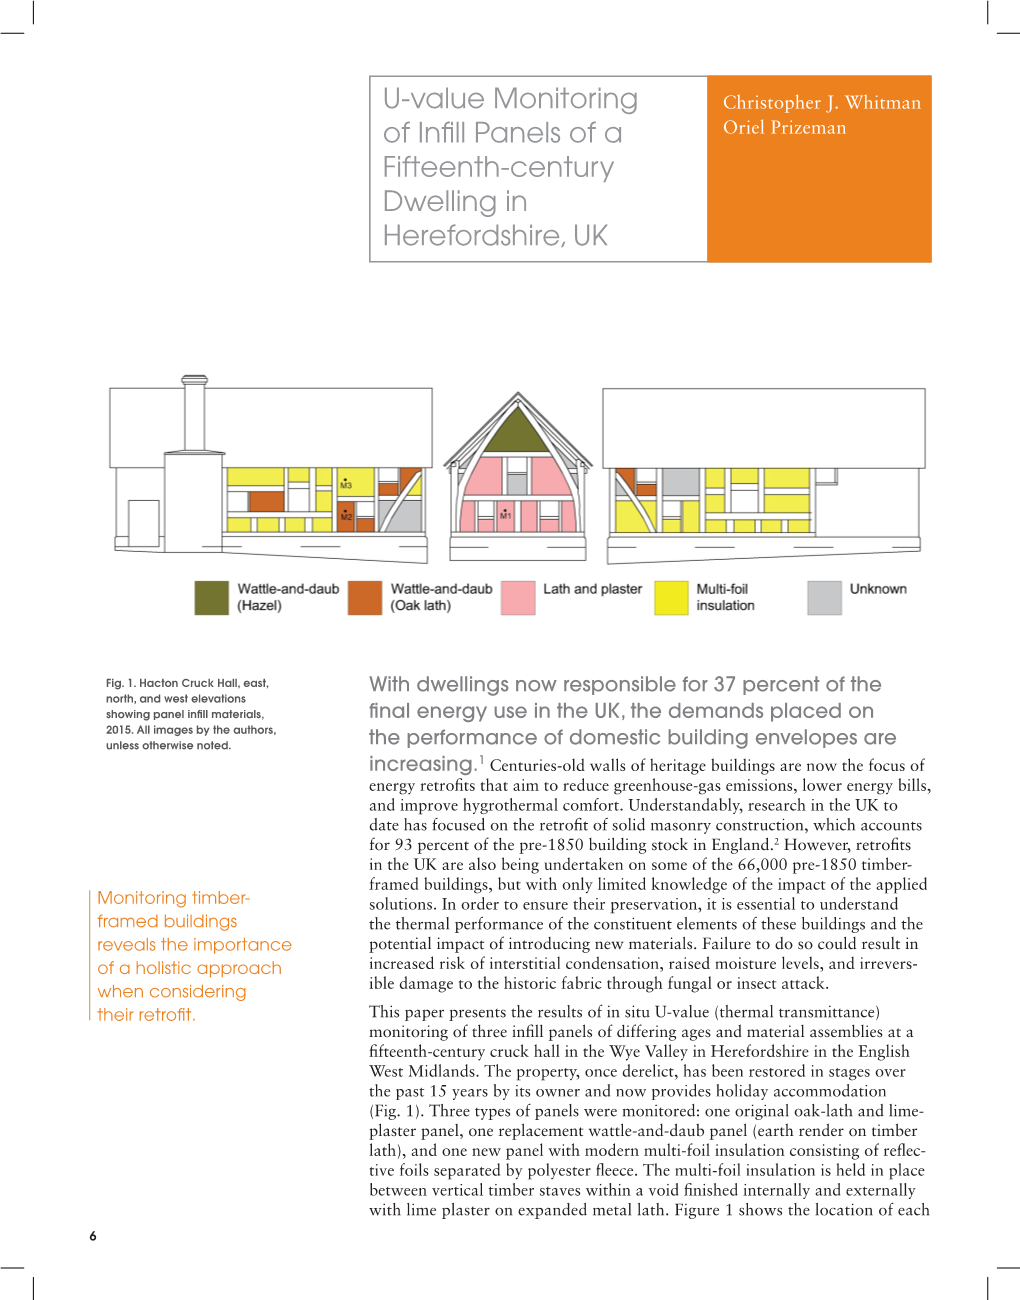 U-Value Monitoring of Infill Panels of a Fifteenth-Century Dwelling In